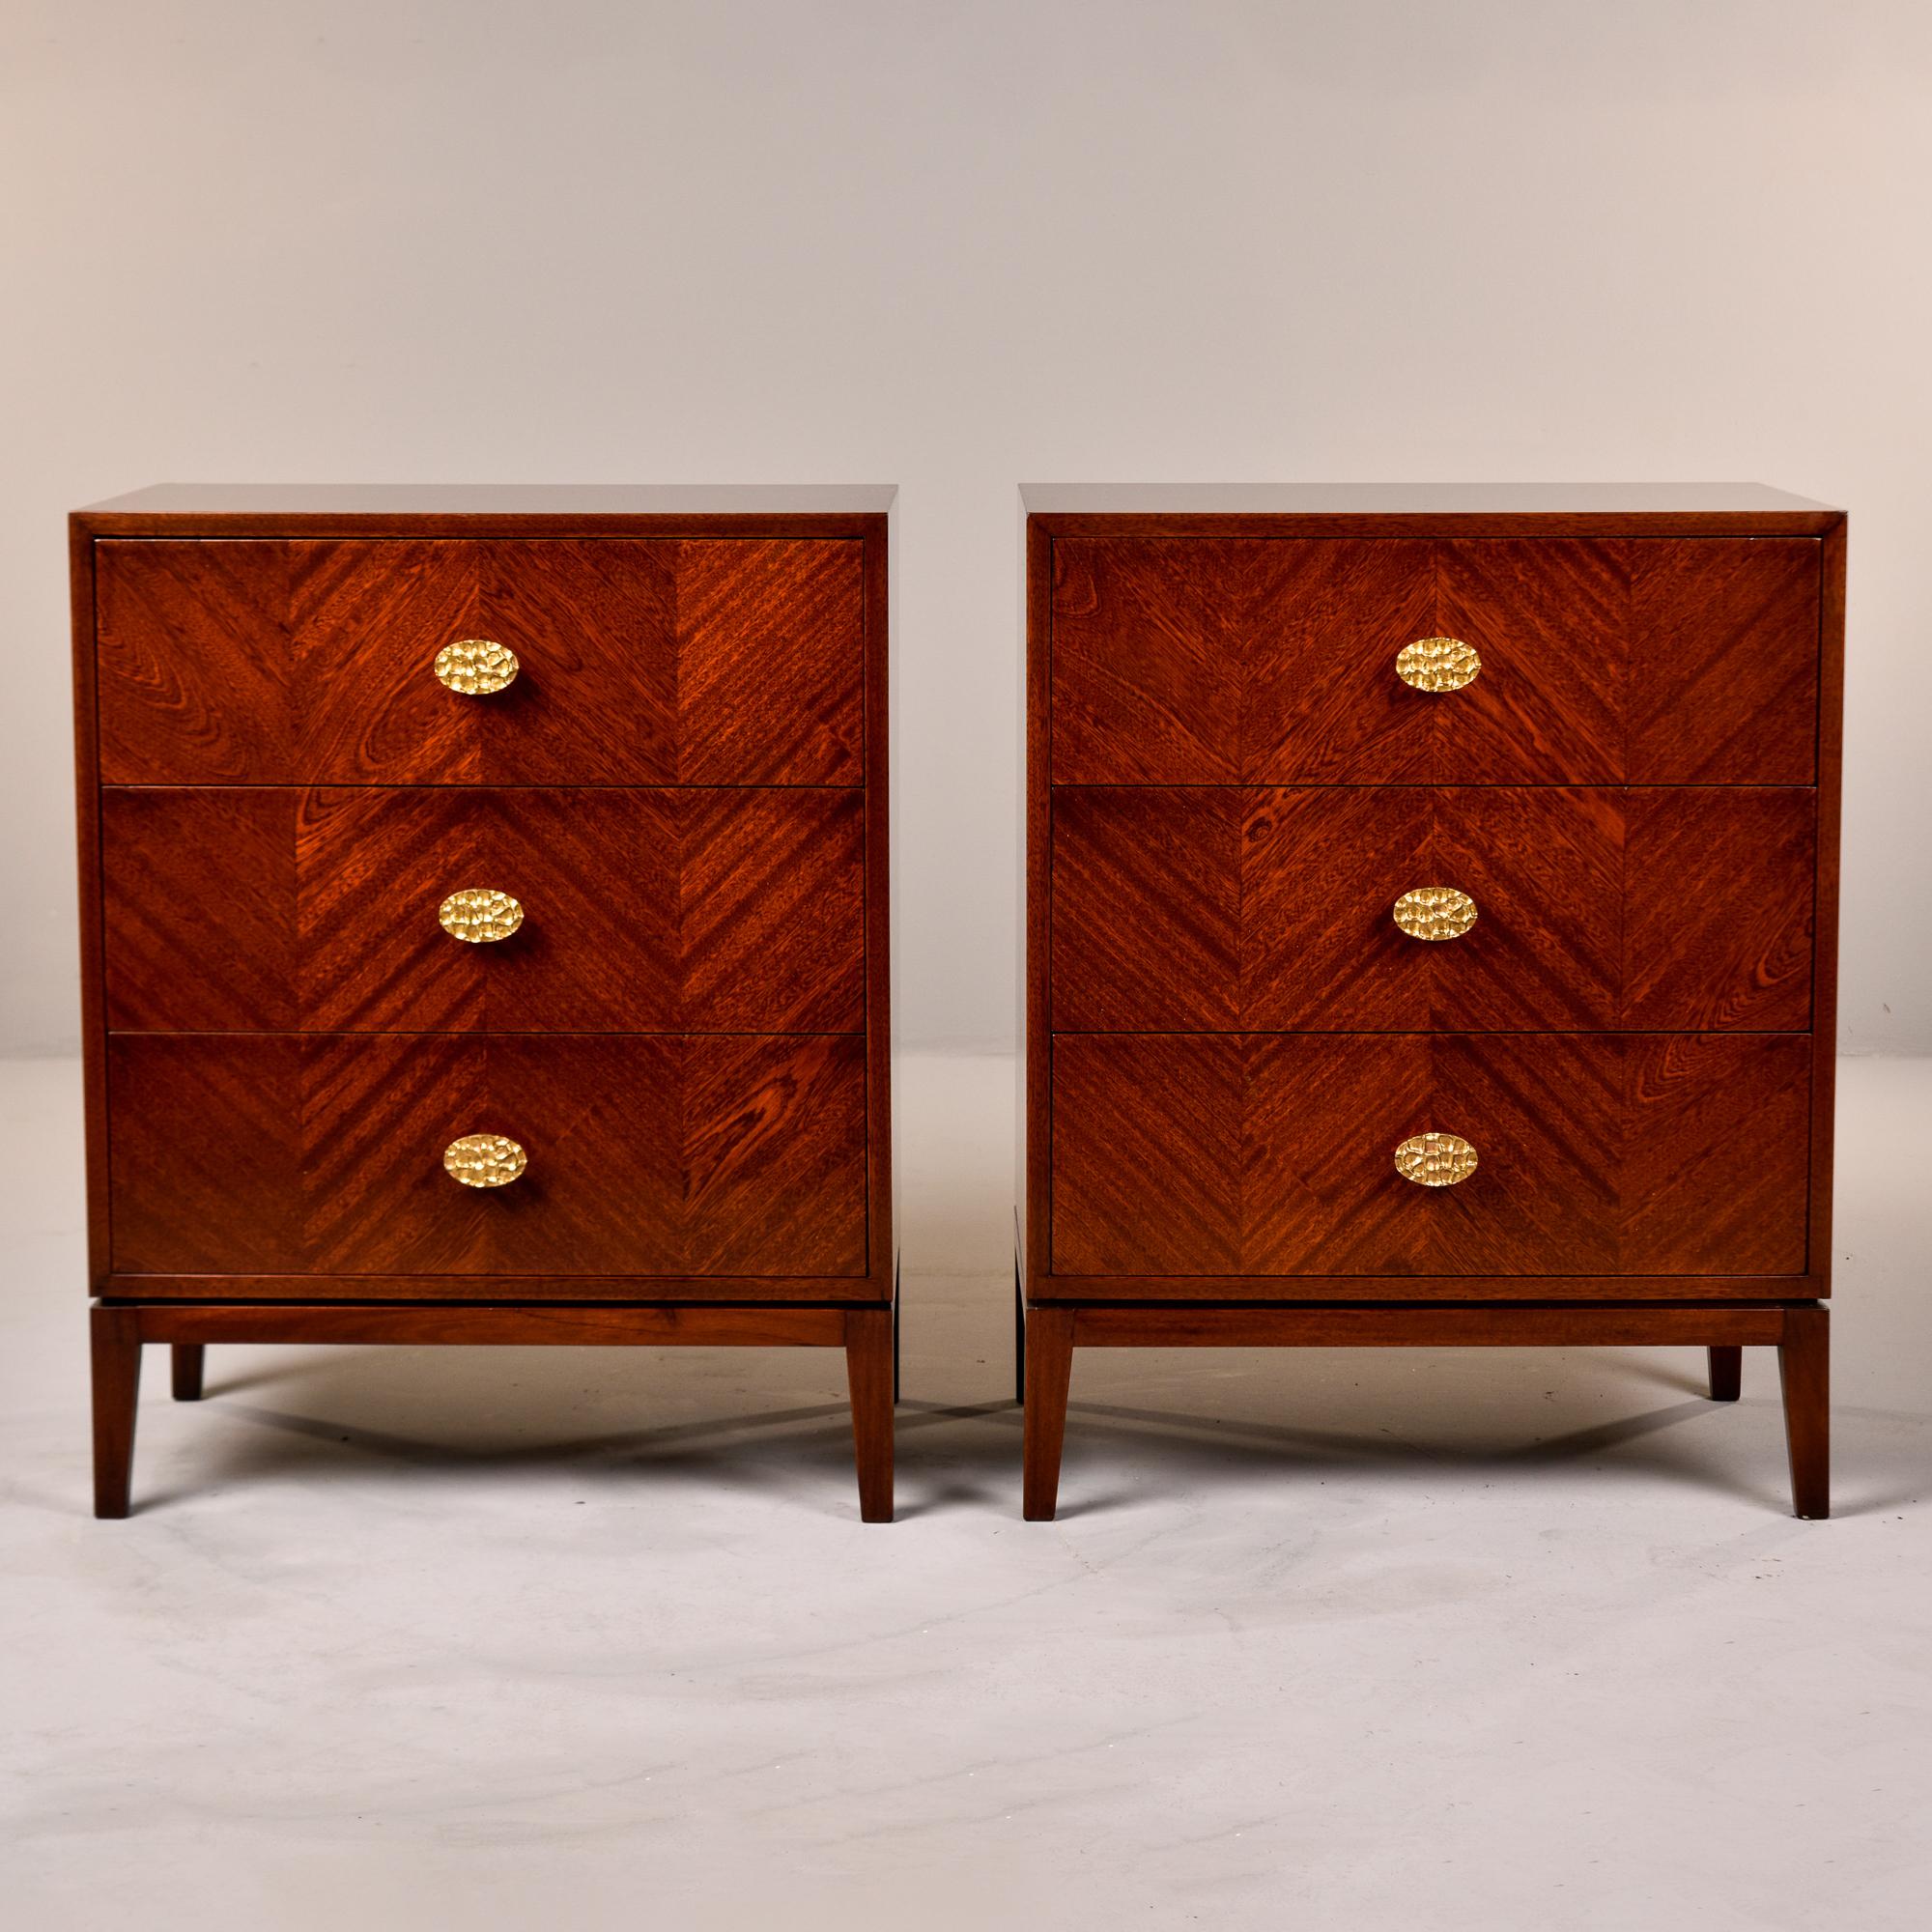 New and made for us in England, this pair of three drawer chests with walnut veneer would work well beside a sofa or bed. Classic shape with slightly tapered legs and a subtle decorative herringbone pattern on drawer fronts created by alternating